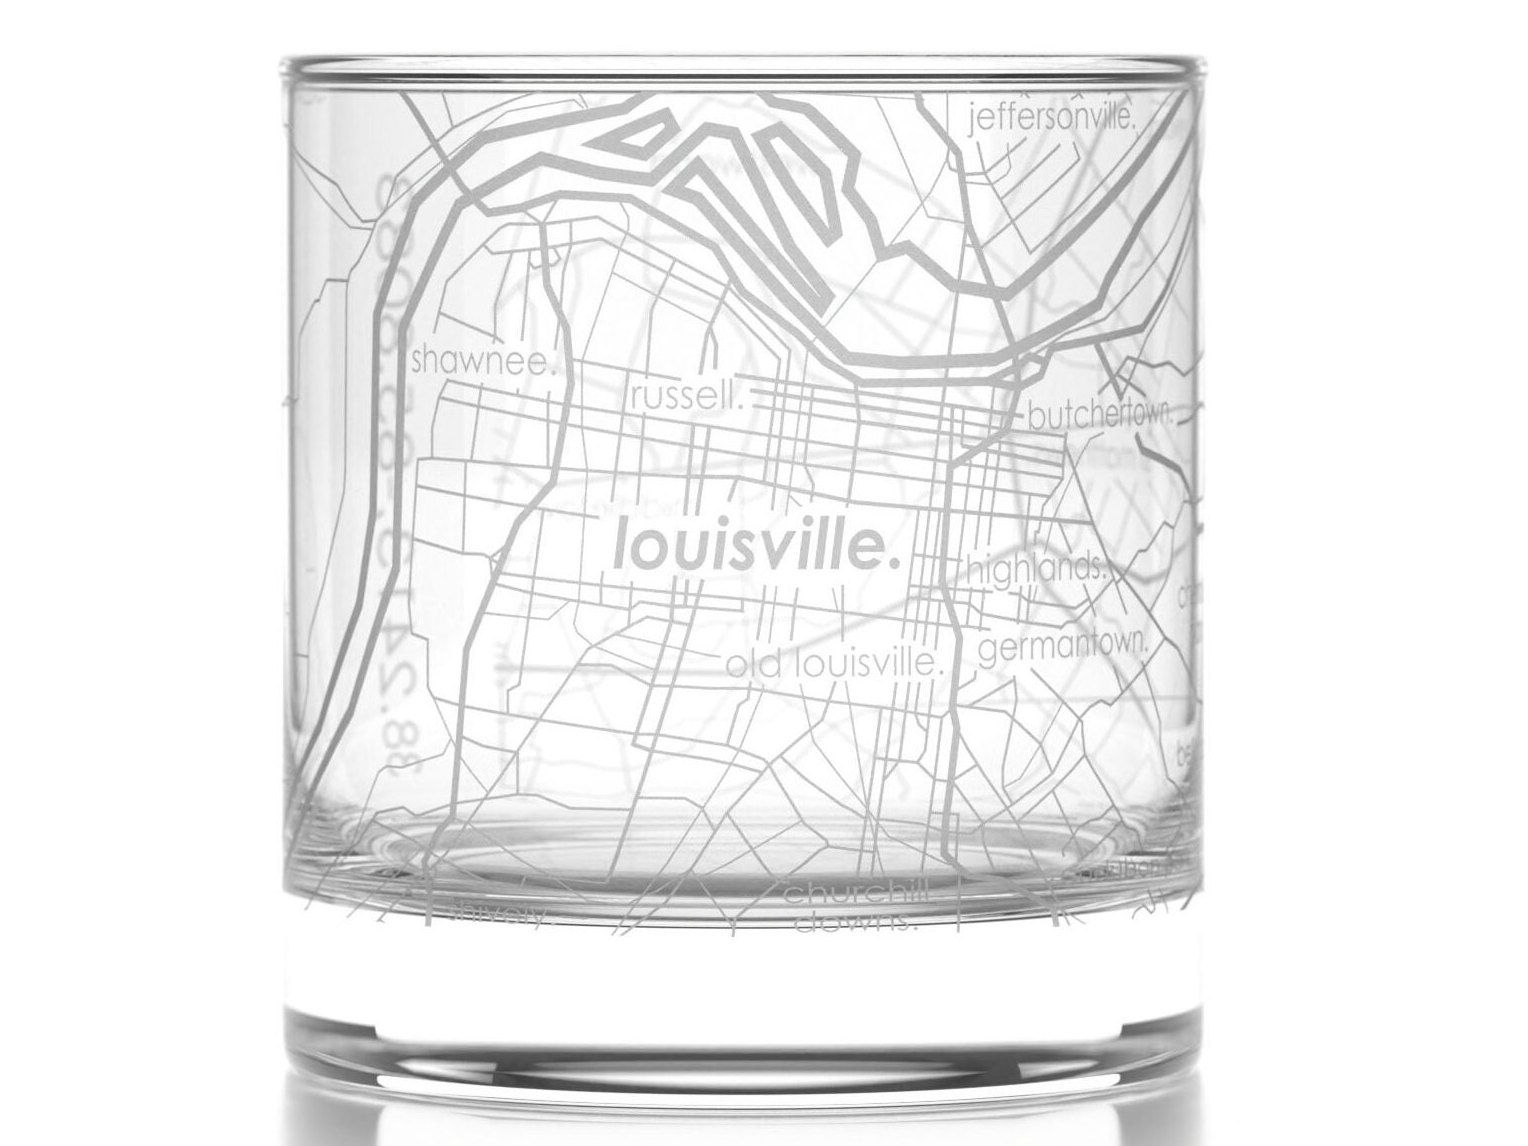 University Of Louisville Whiskey Glass Set (2 Low Ball Glasses) - Contains  Full Color Louisville Cardinals Logo & Campus Map - Cardinals Gift Idea for